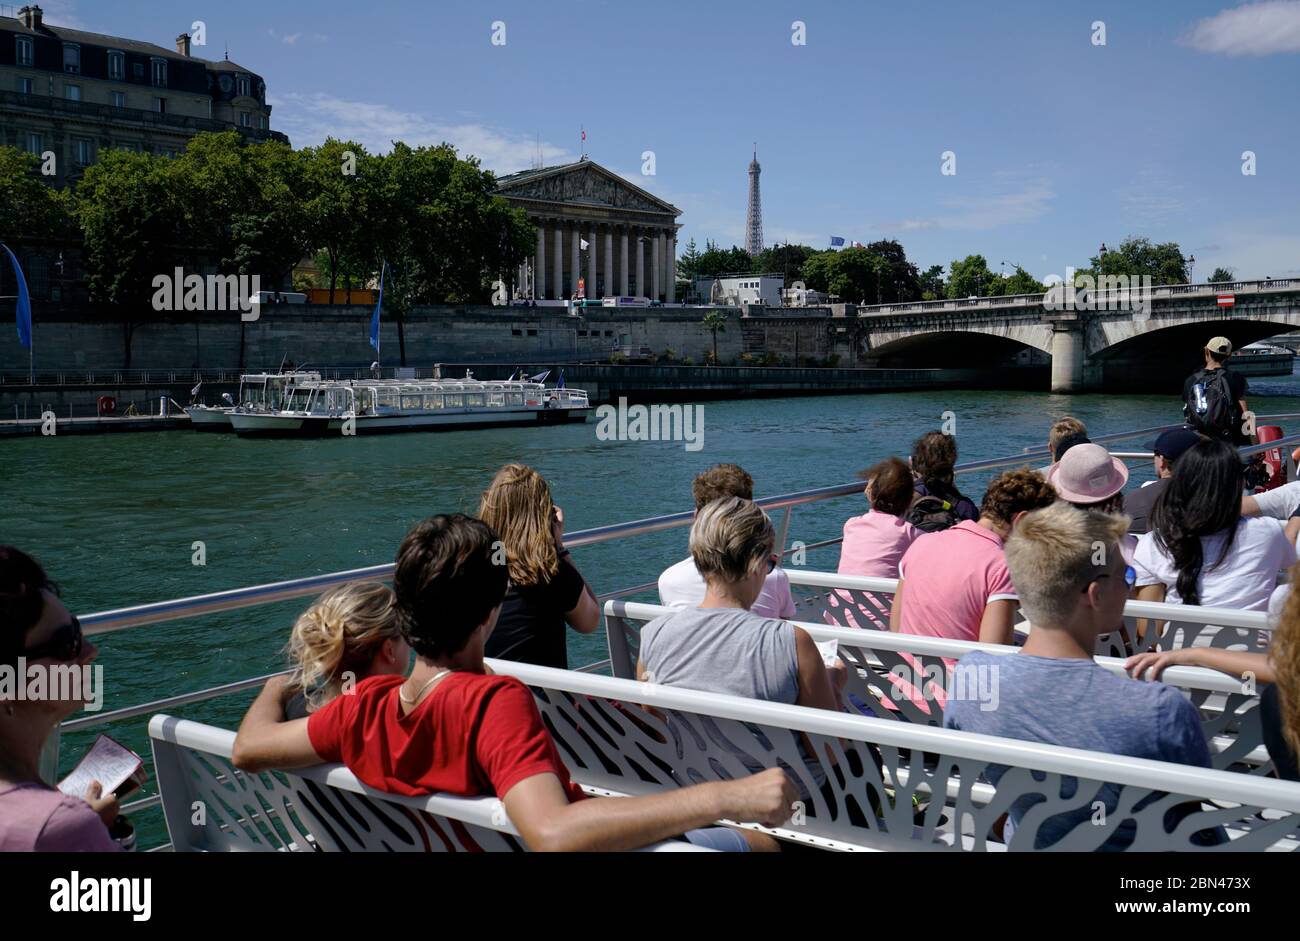 Tourists on the Bateaux-Mouches Seine river tour boat cruises in Seine river with Pont de la Concorde bridge, National Assembly building and Eiffel Tower in the background.Paris.France Stock Photo